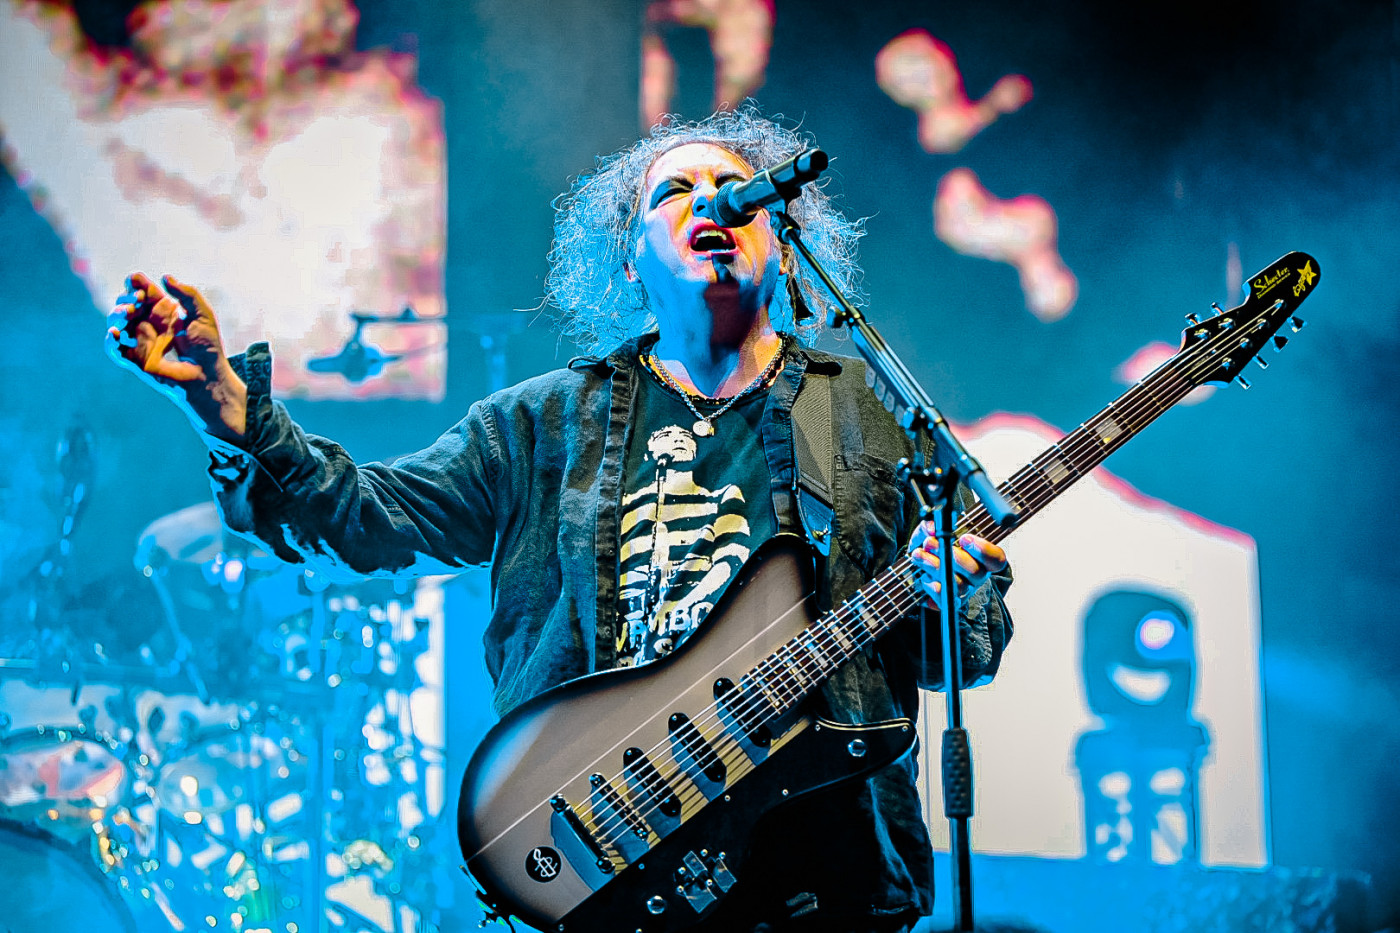 Gallery: The Cure in Glasgow - 4th December 2022